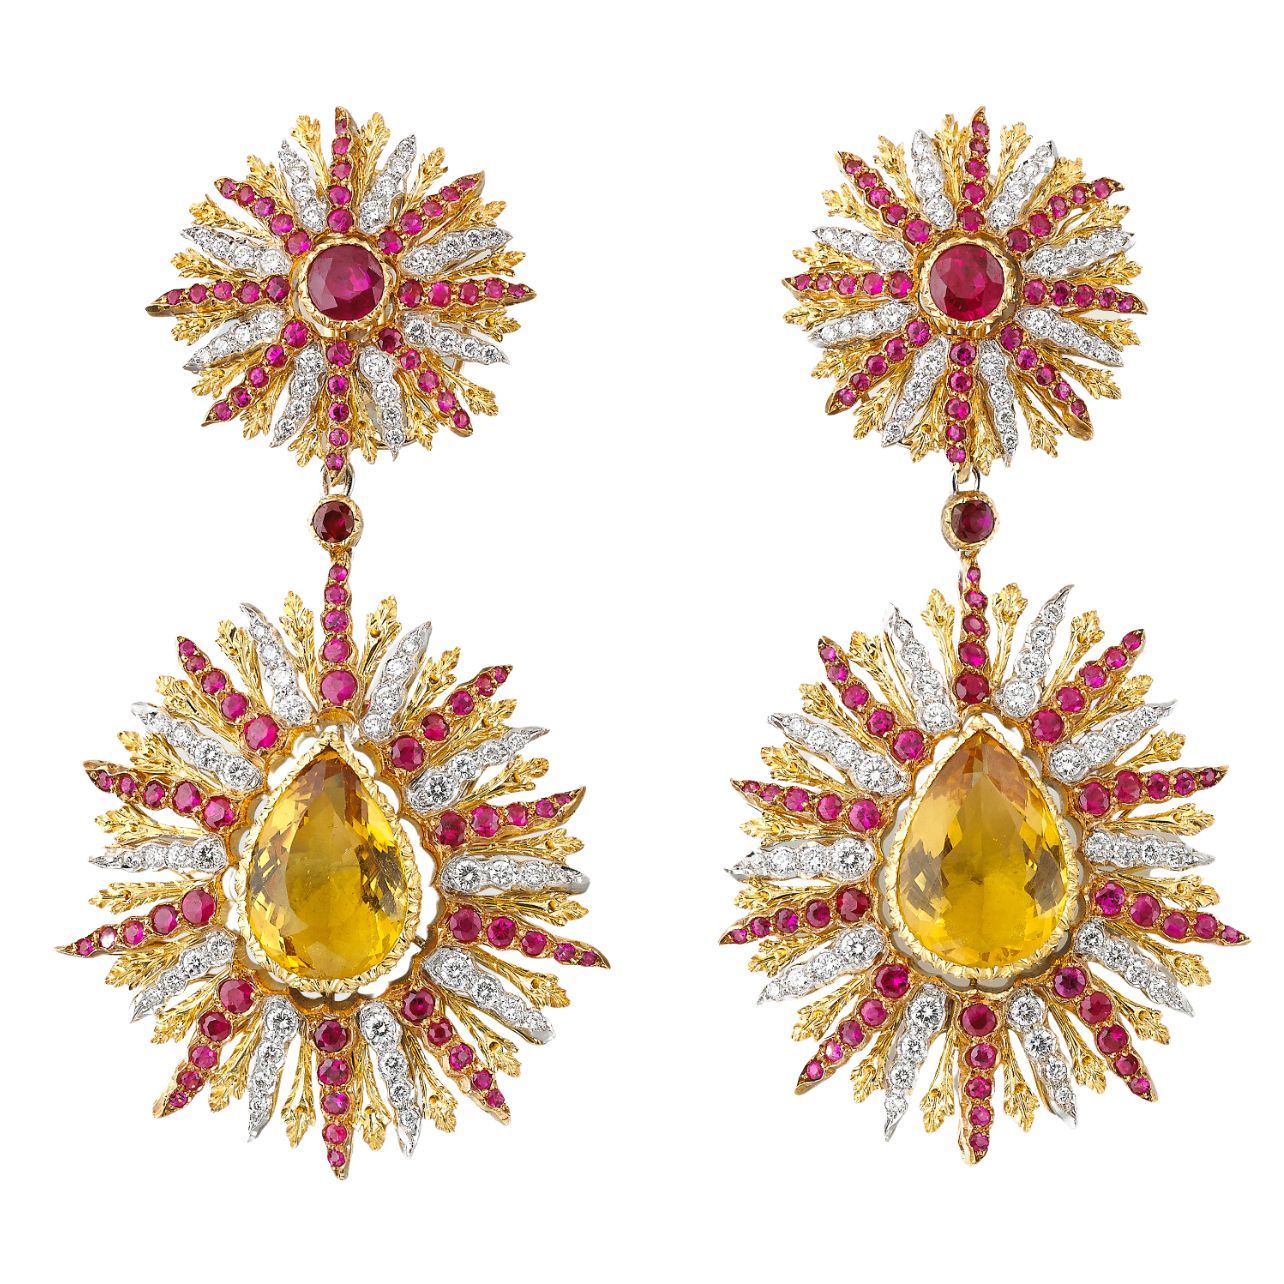 Colored cocktail earrings in 18k yellow, white, and pink gold set with a 10-carat heliodor, rubies, and brilliant-cut diamonds.